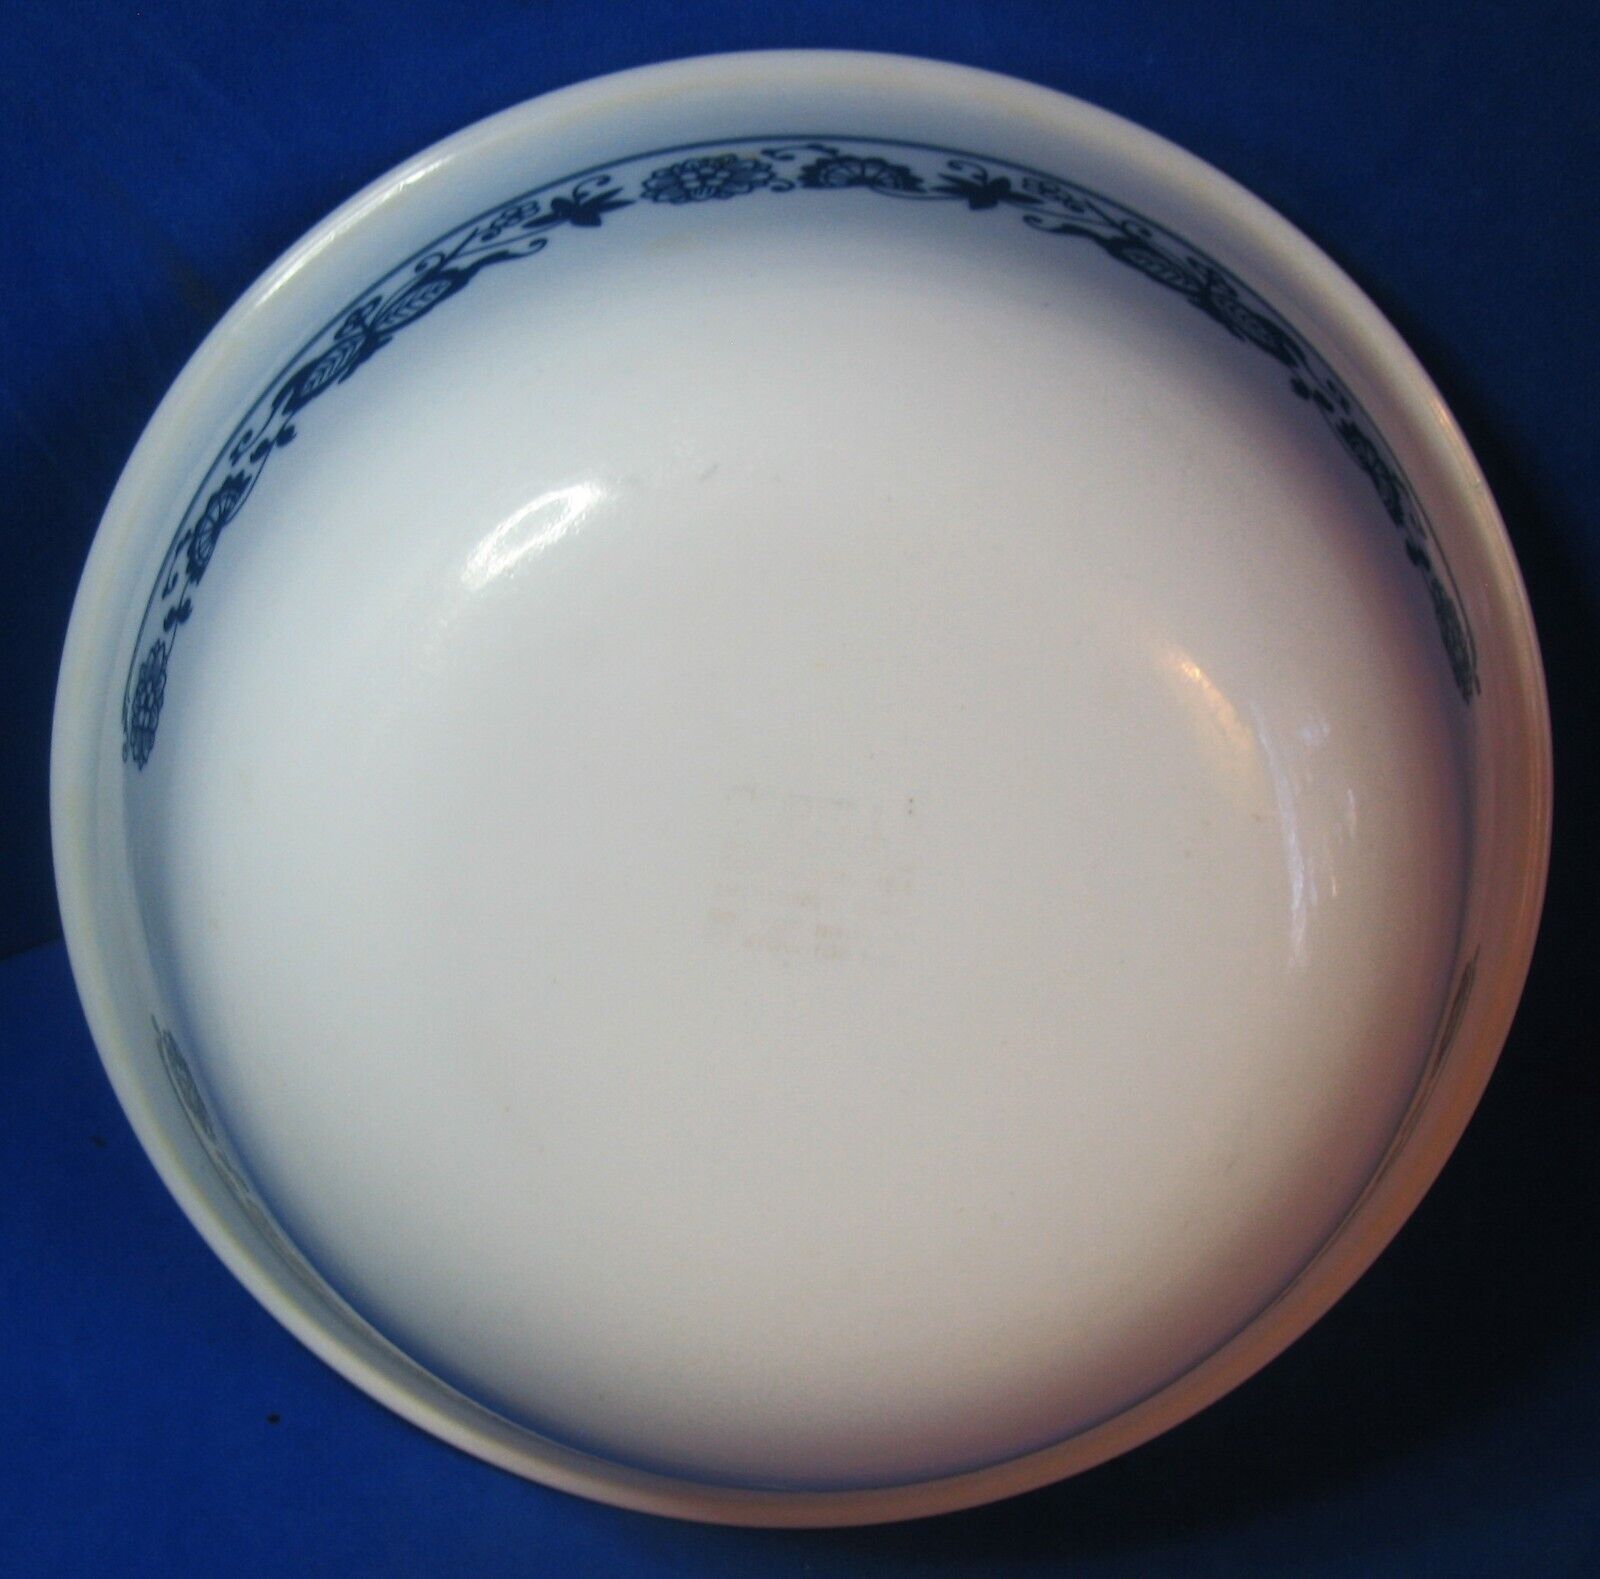 Single Corning Corelle Old Town Blue Onion Cereal or Soup Bowl